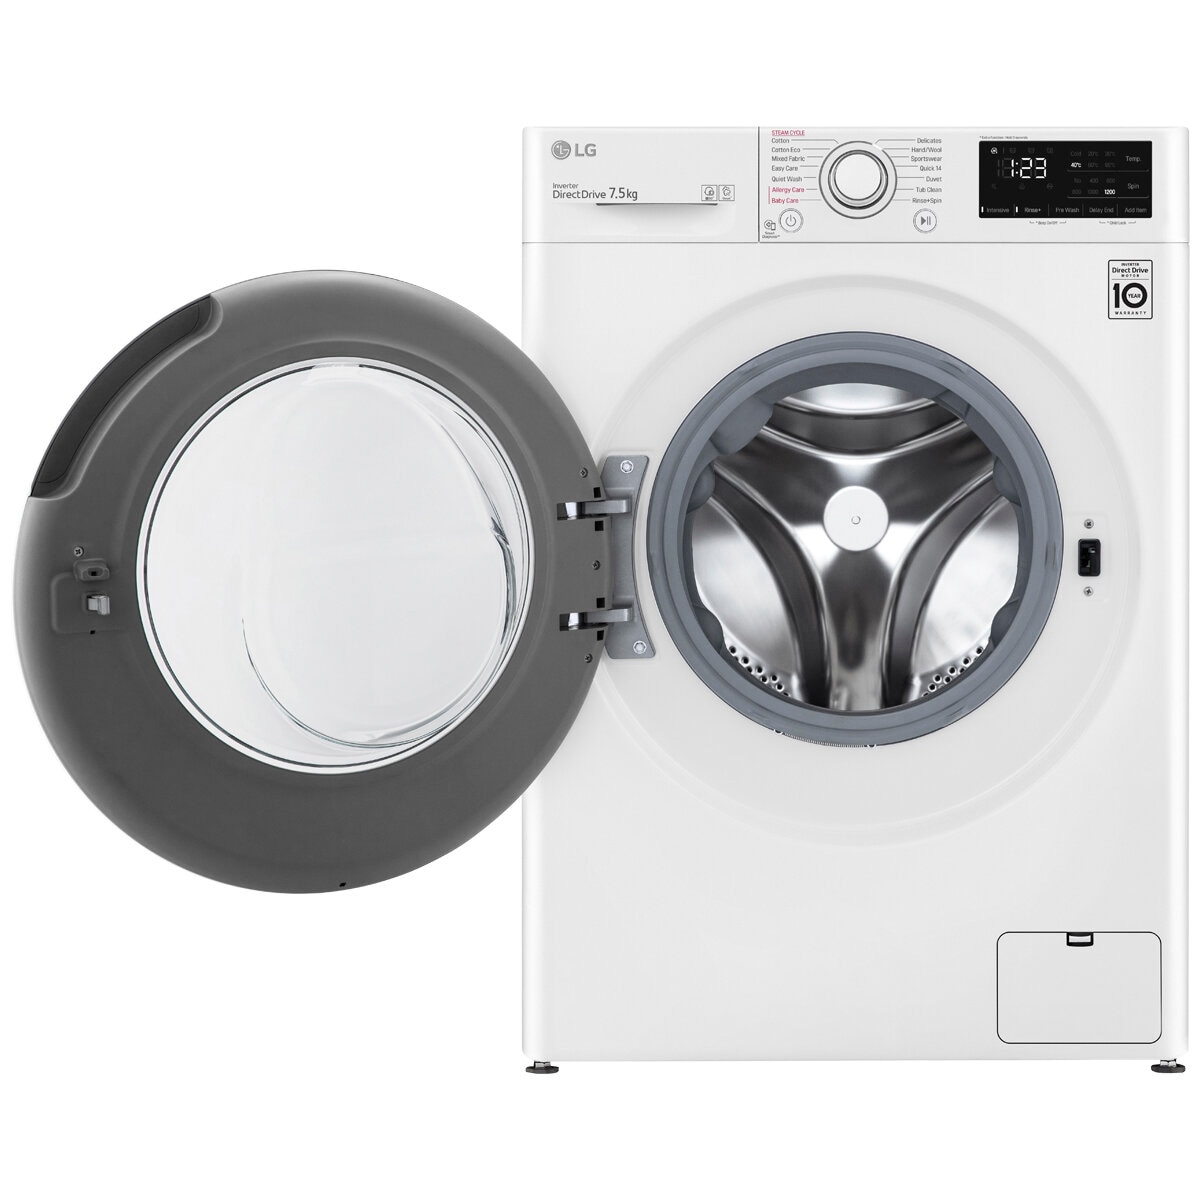 LG 7.5kg Front Load Washing Machine WD1275A1